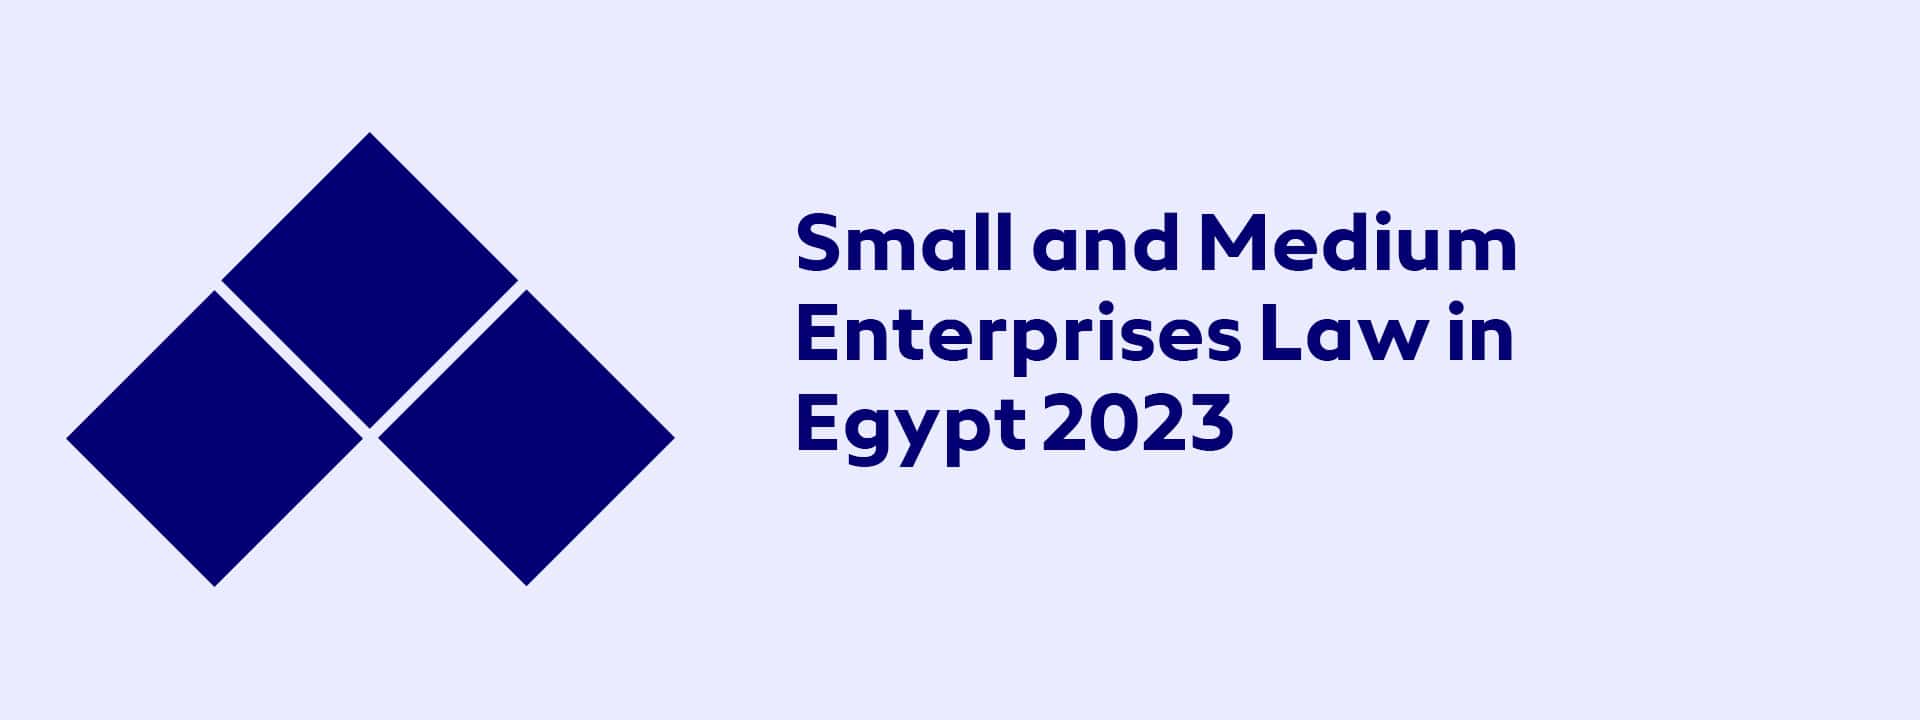 Small and Medium Enterprises Law in Egypt 2023